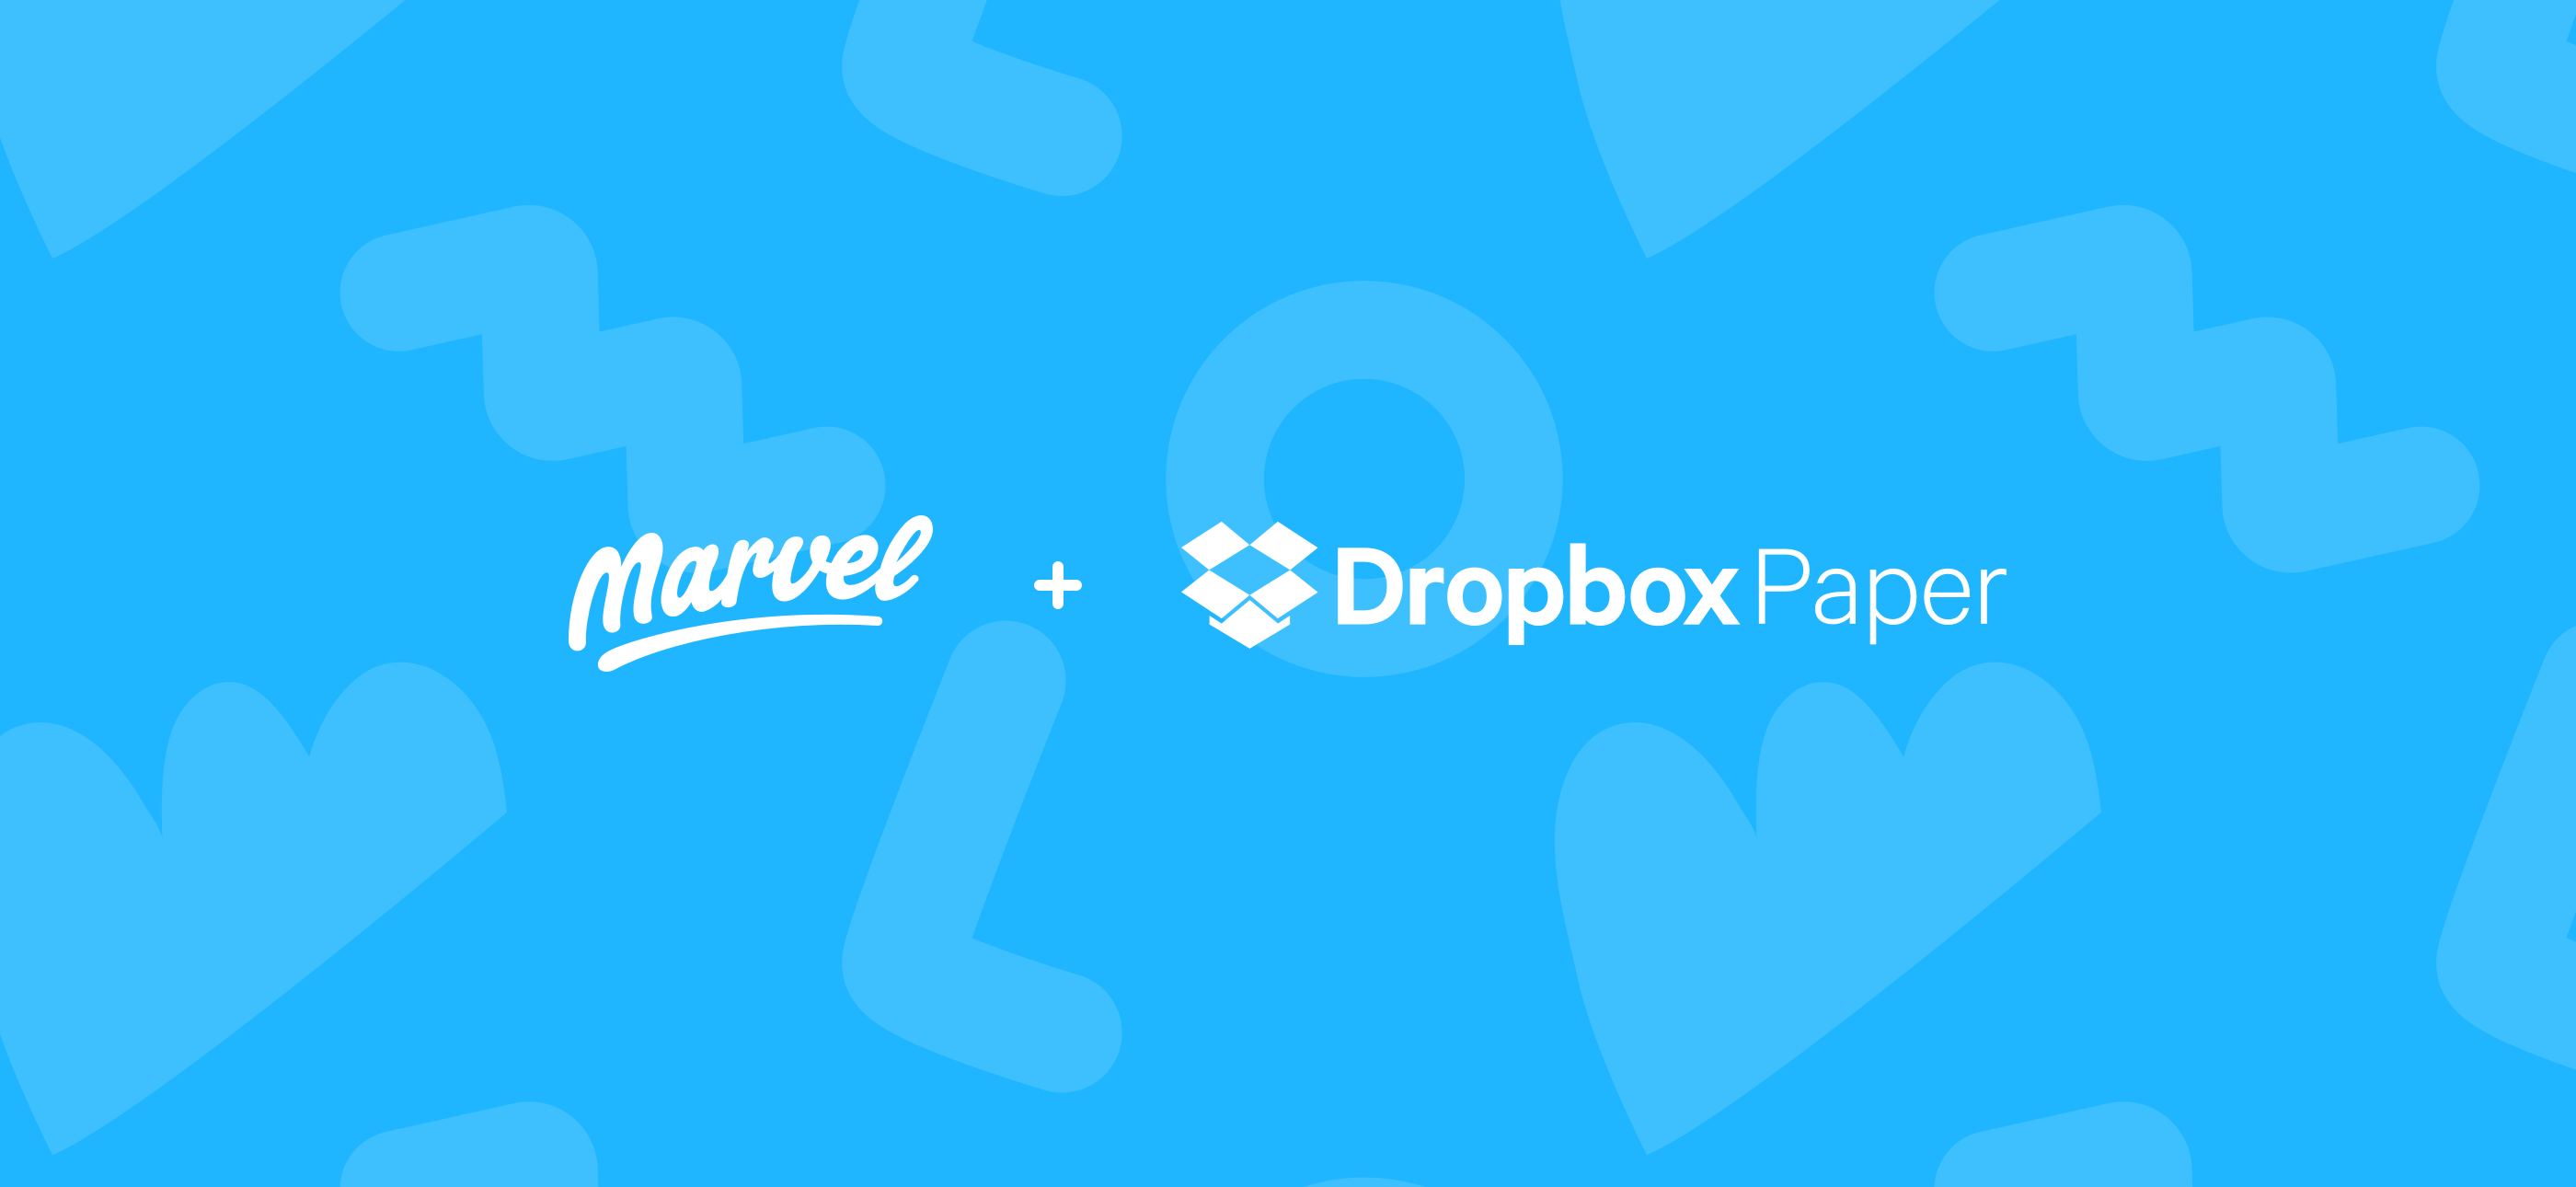 Introducing Marvel for Dropbox Paper